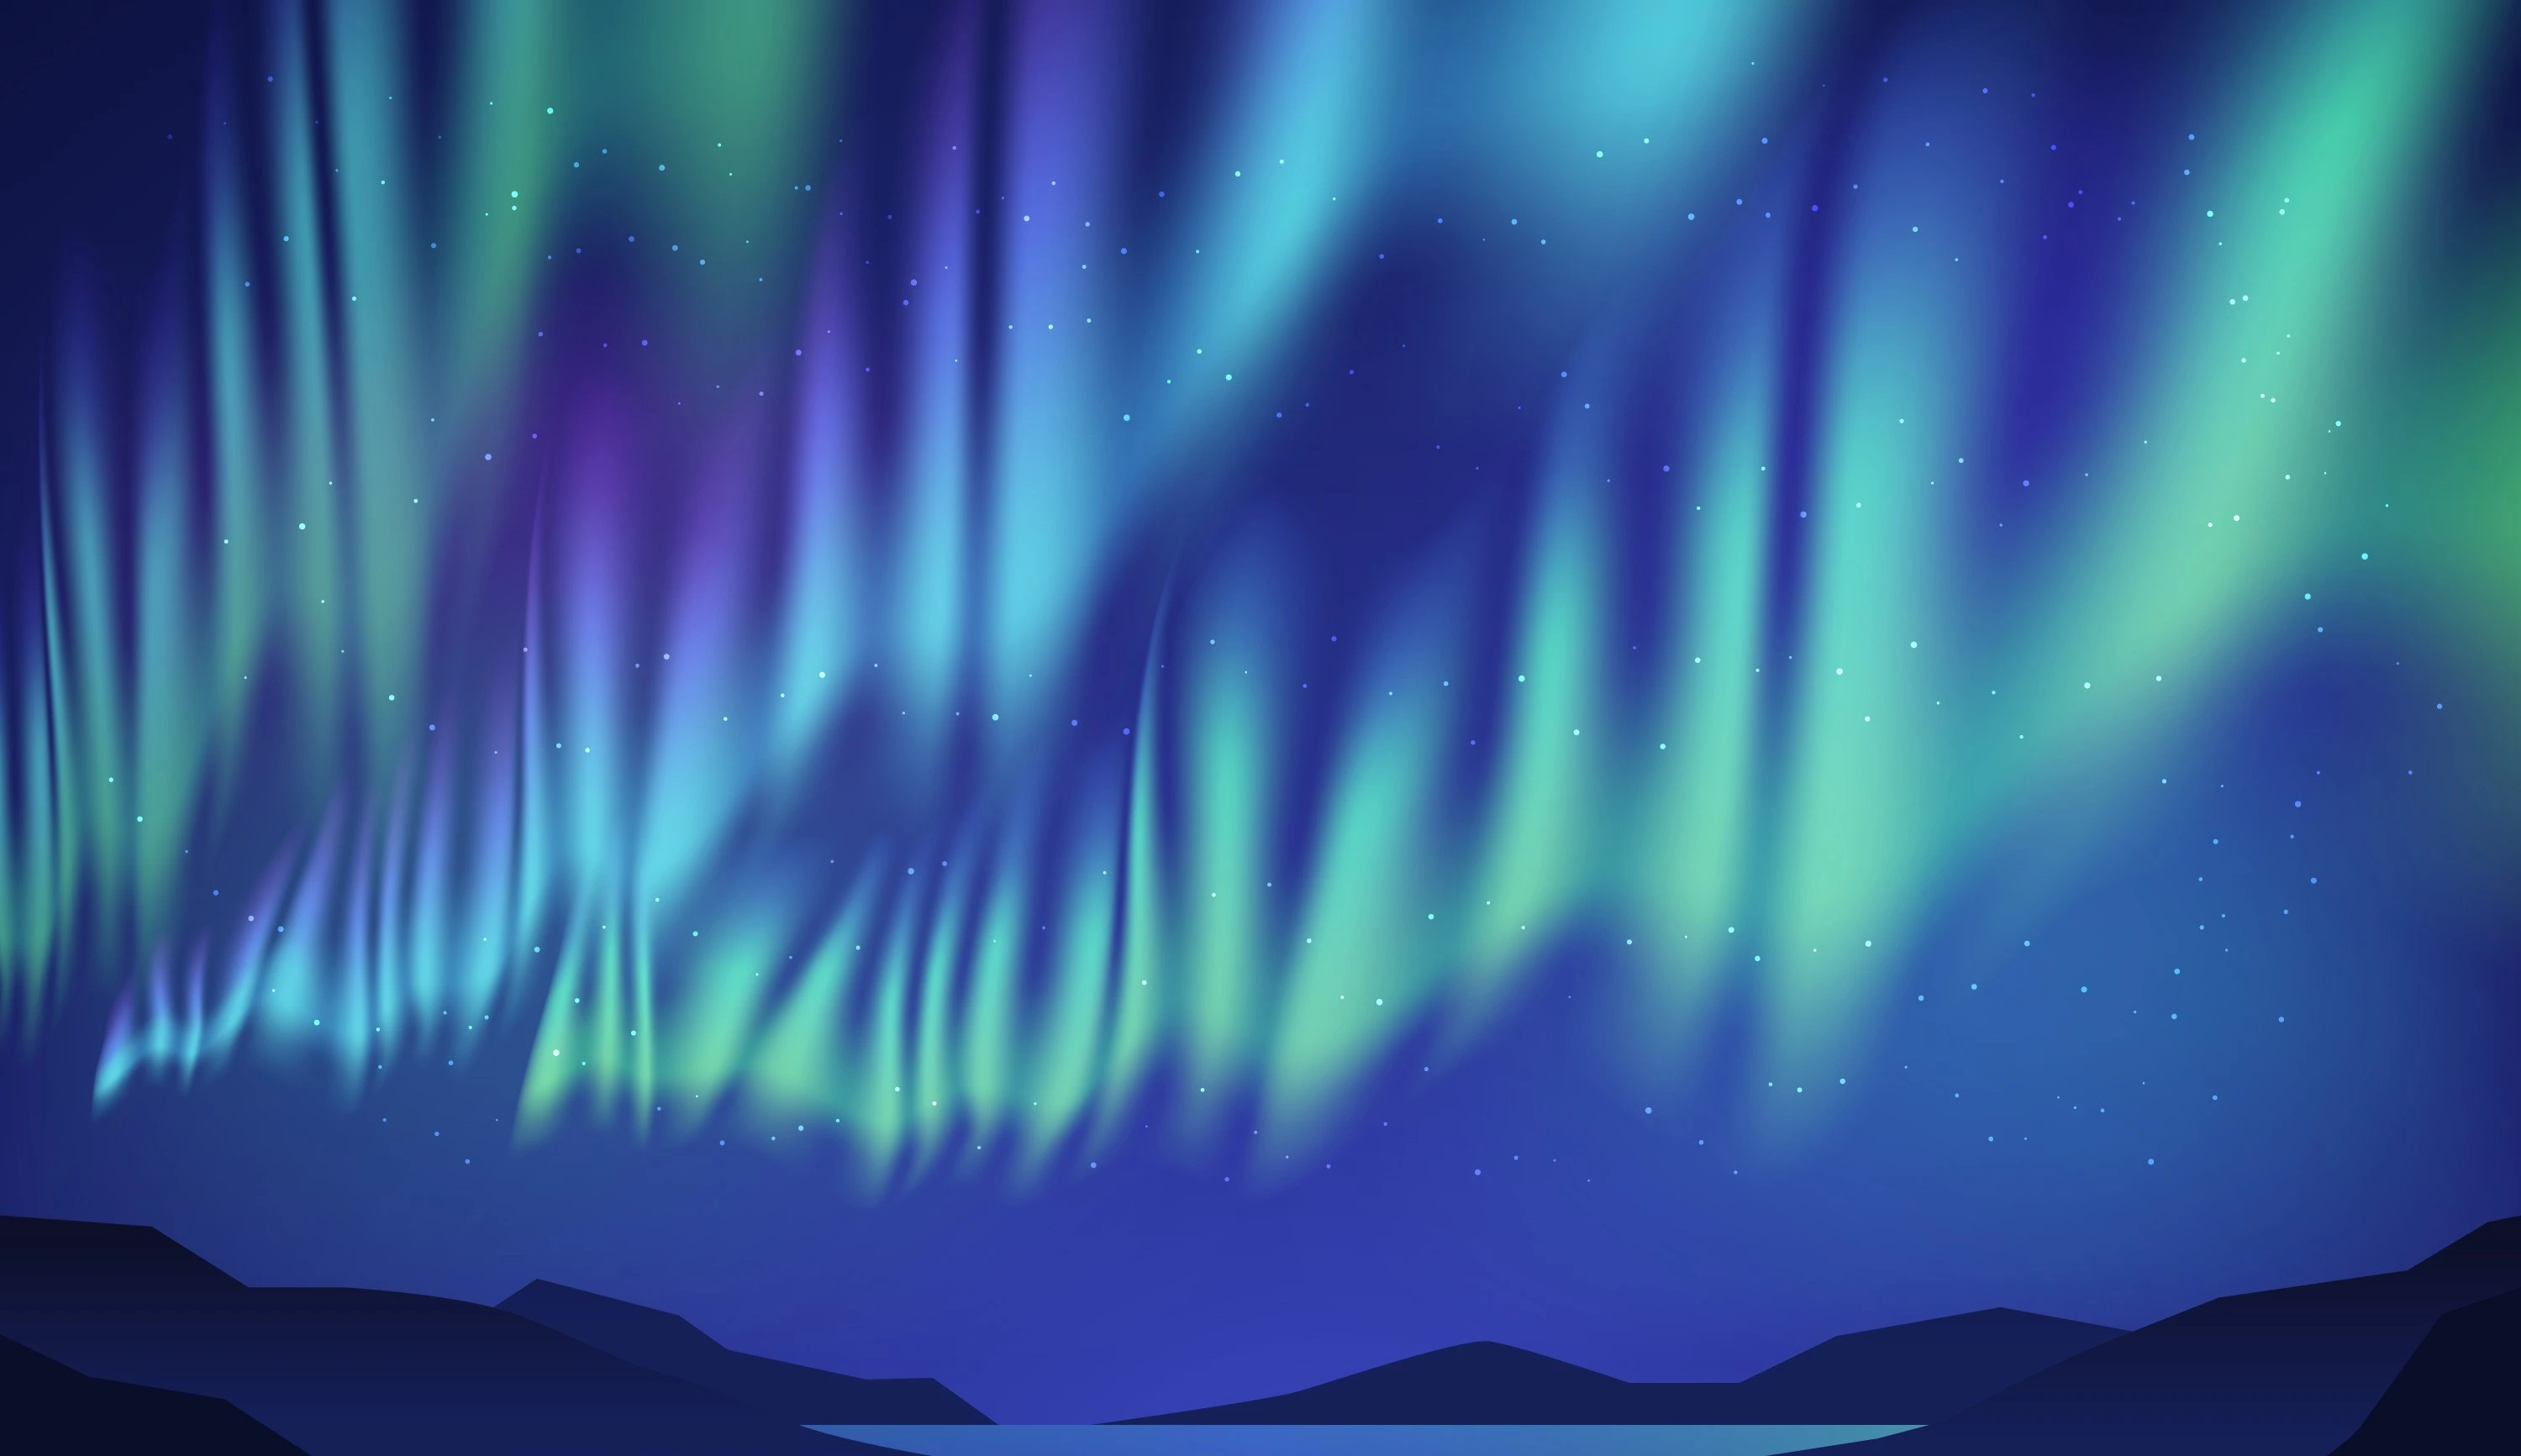 The potential of the Aurora Borealis in cybersecurity